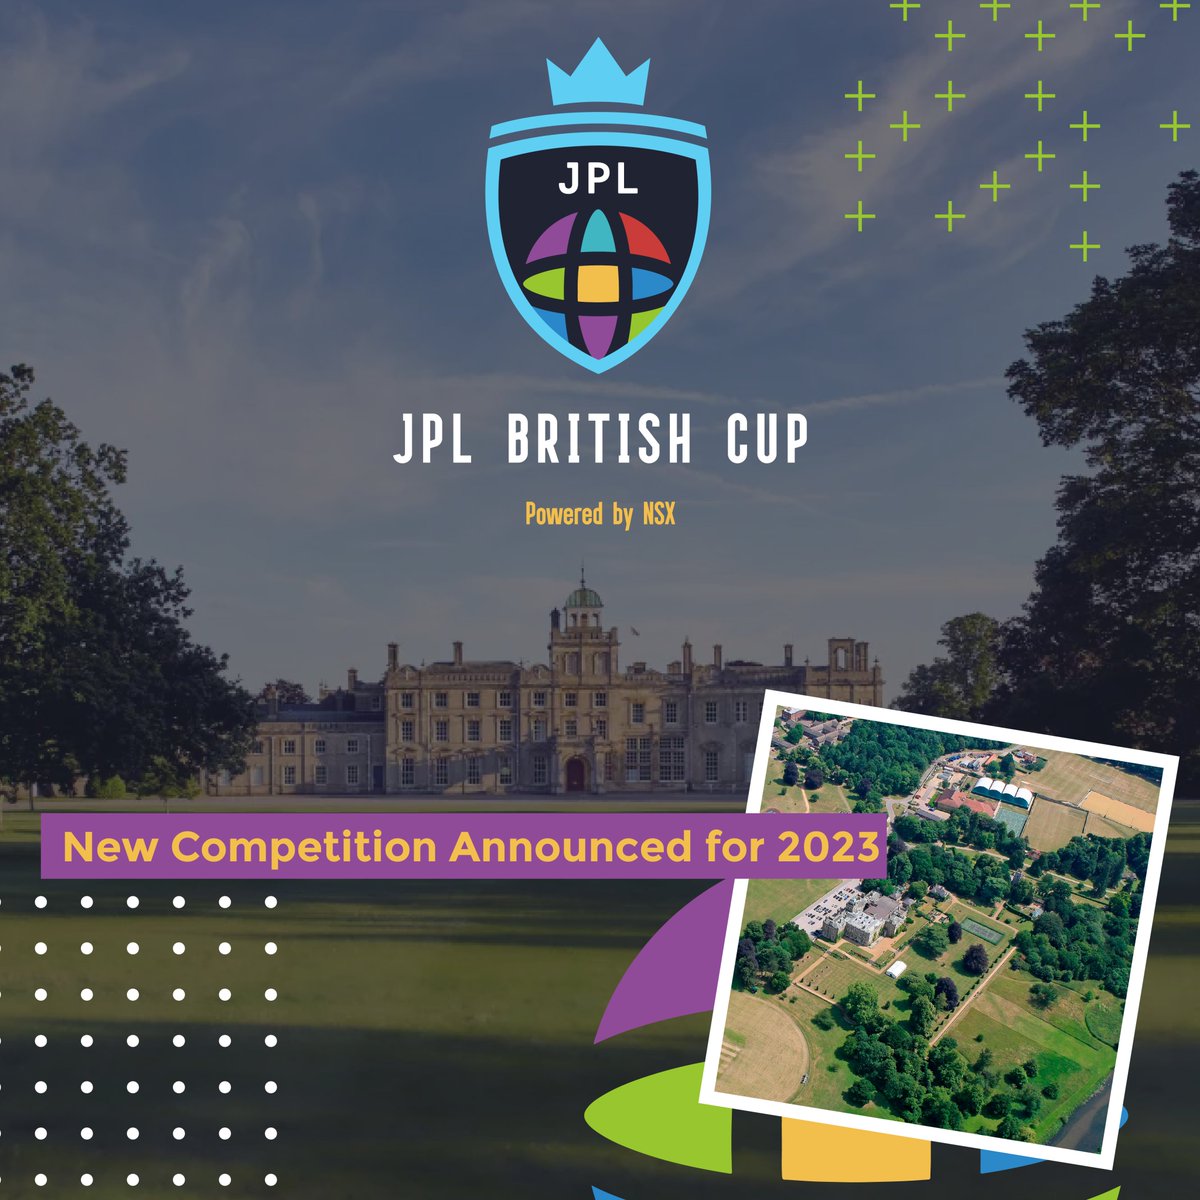 🏆 We are delighted to announce the JPL British Cup for 2023, in partnership with @nsxgroup! 

Visit the link below to register your place at the inaugural tournament. 

✍️ eu.jotform.com/app/2232829775…

#EllevateJPL | #JPLBritishCup